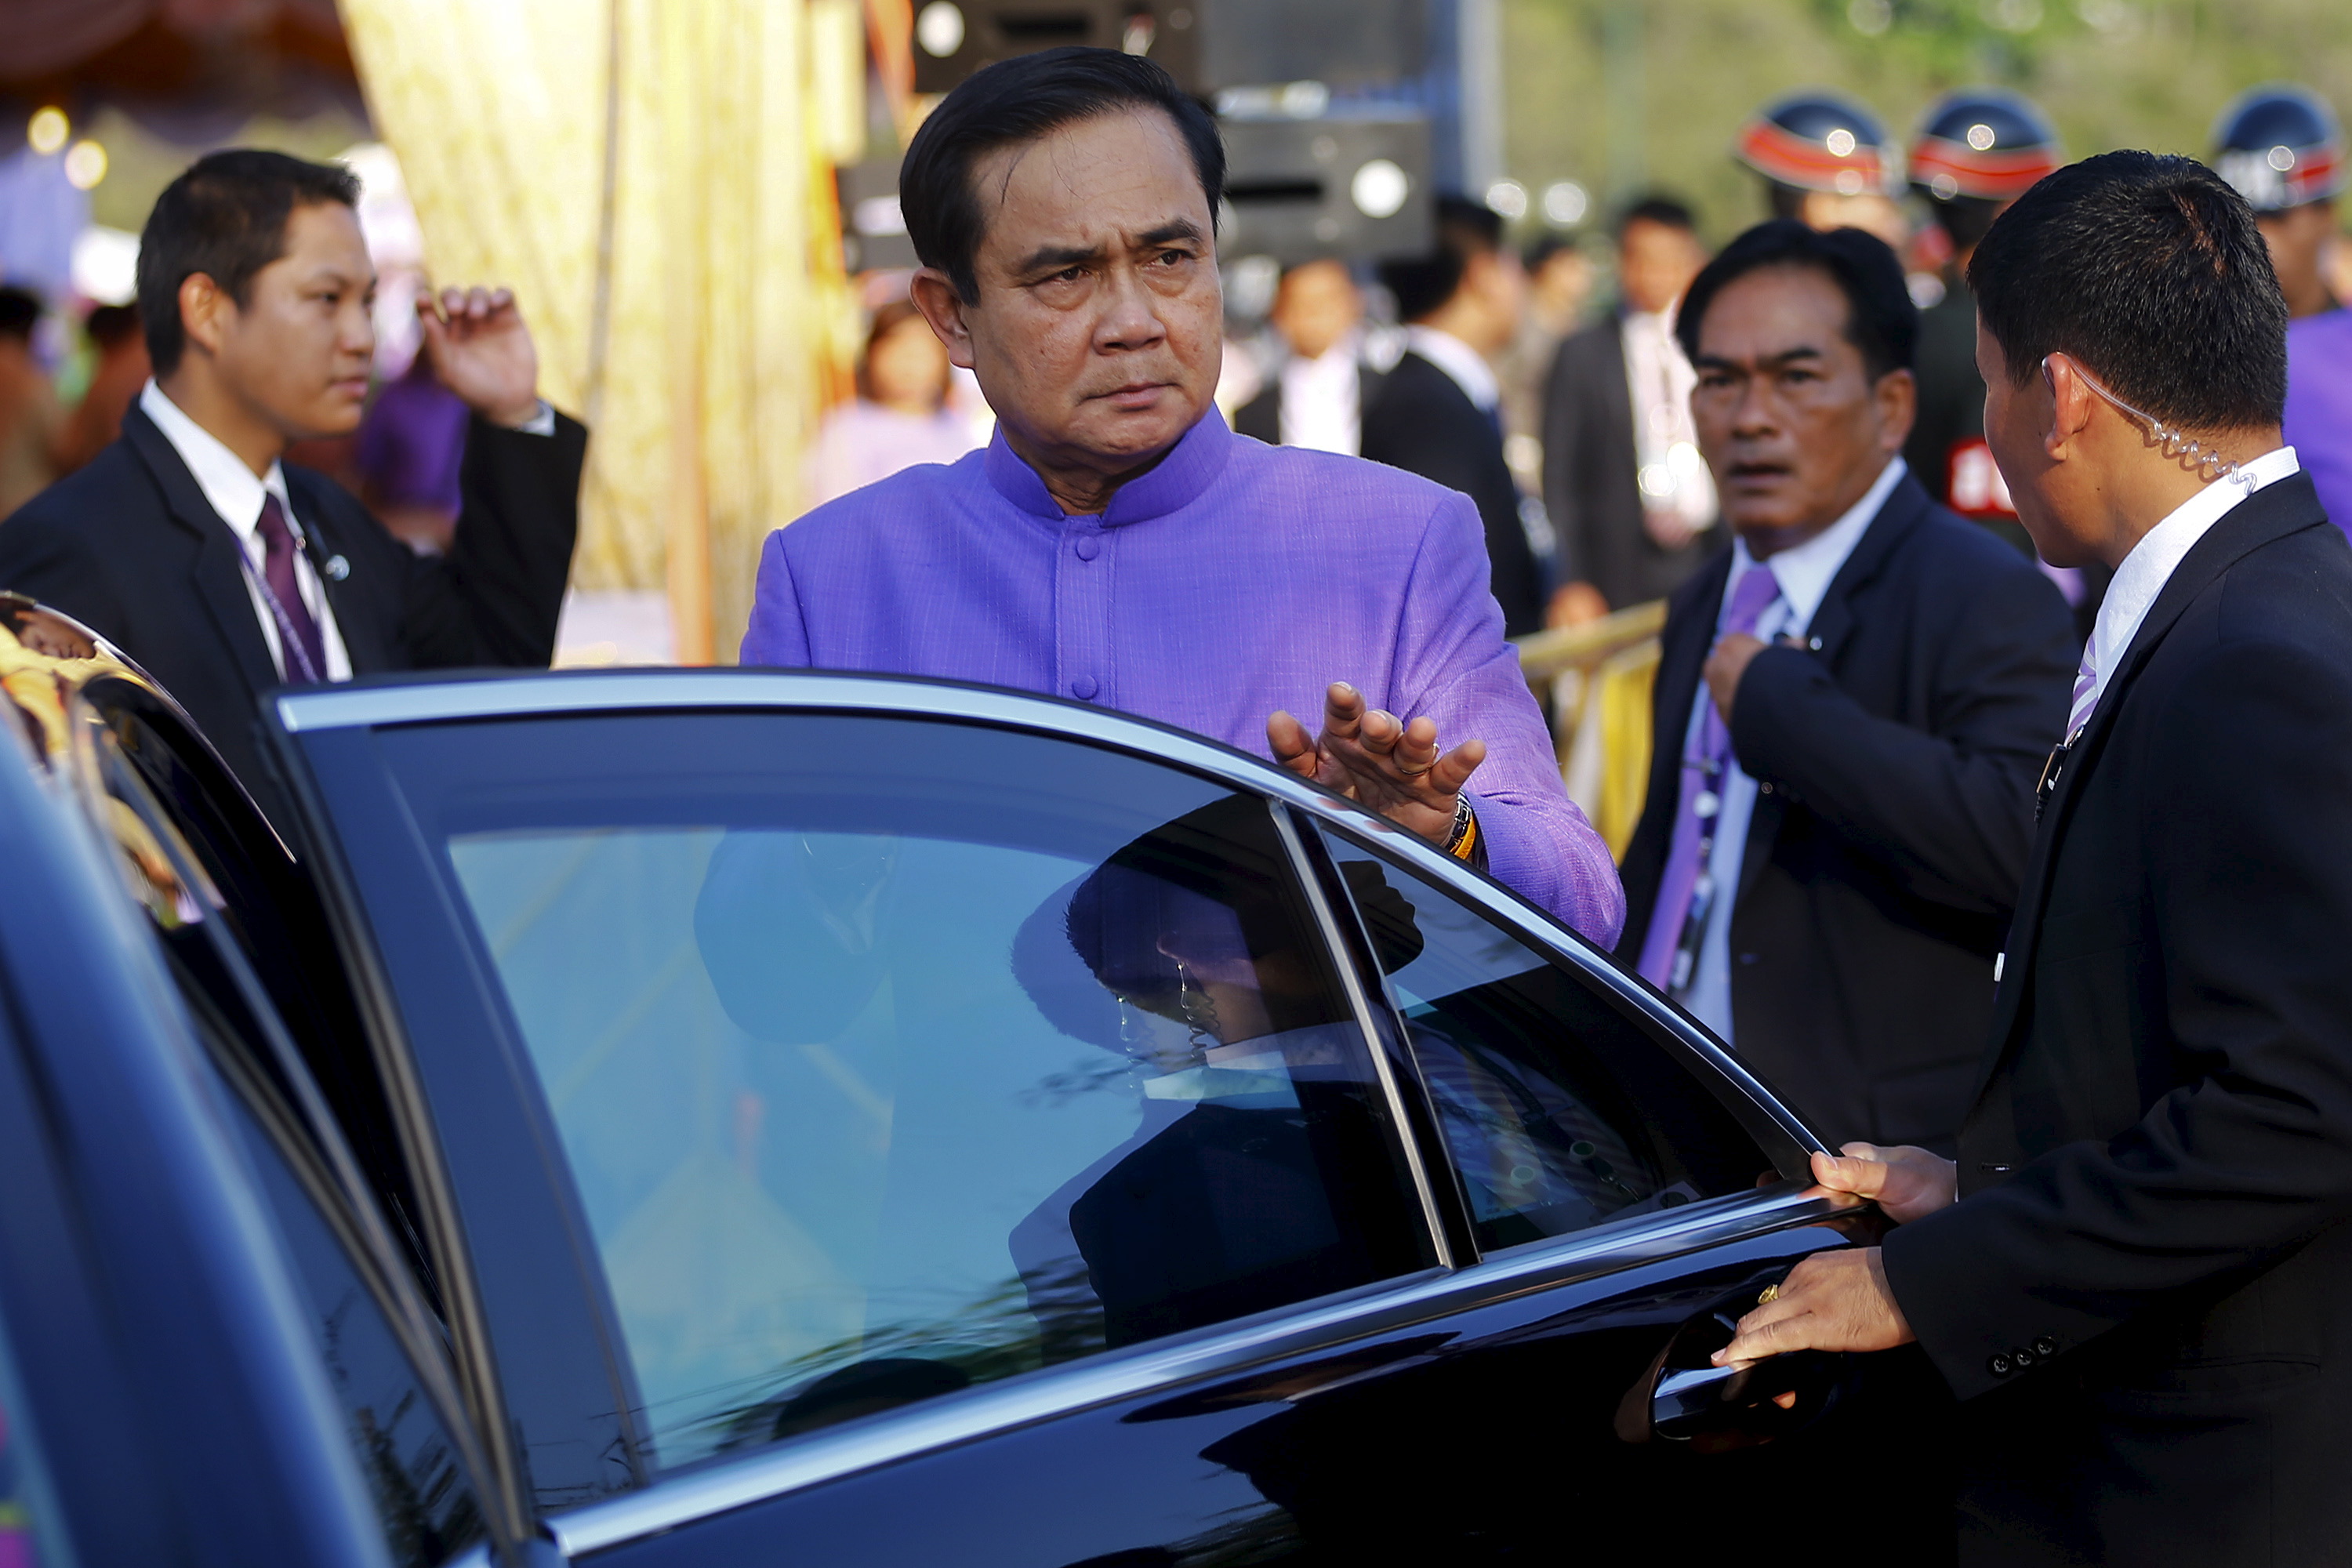 Prime Minister Prayuth Chan-ocha gets in his car after the merit-making ceremony on the occasion of Princess Maha Chakri Sirindhorn's birthday at Sanam Luang in Bangkok